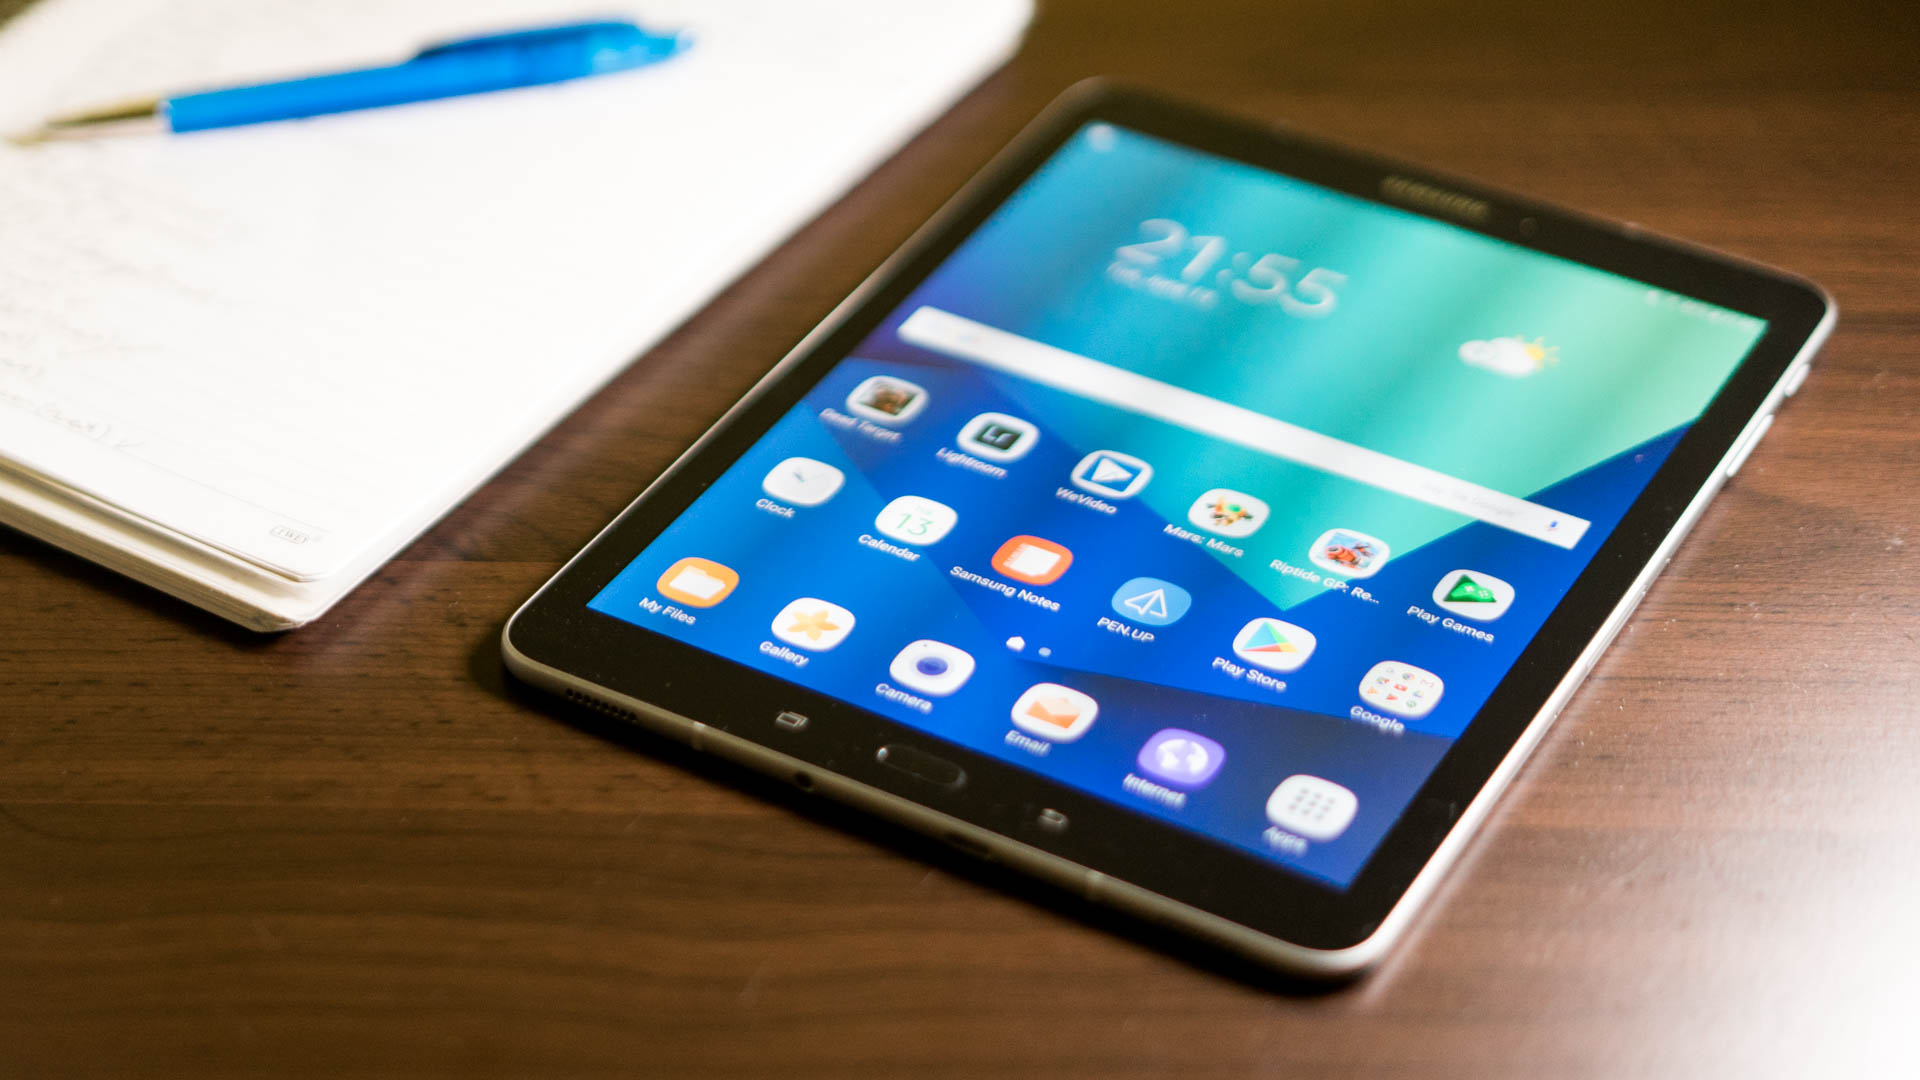 Samsung Galaxy Tab S3 Full Specifications, Features & Price